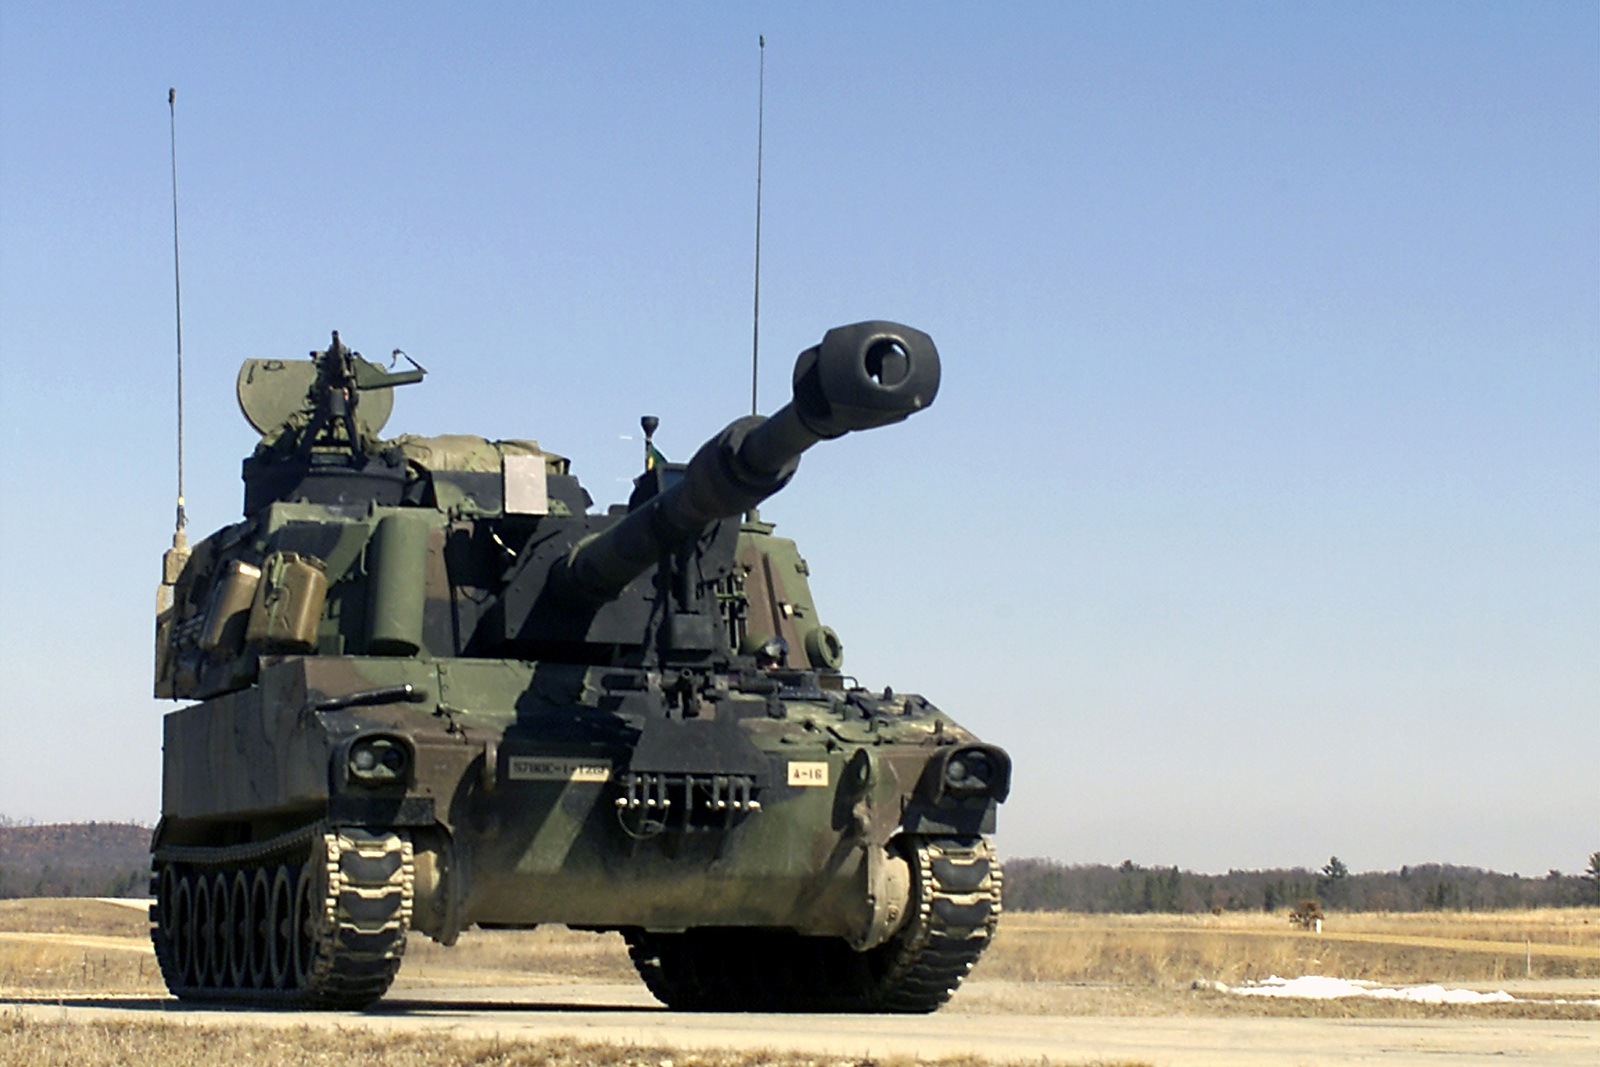 front-view-of-a-us-army-m109a6-155mm-paladin-self-propelled-howitzer-d9ec4f-1600.jpg